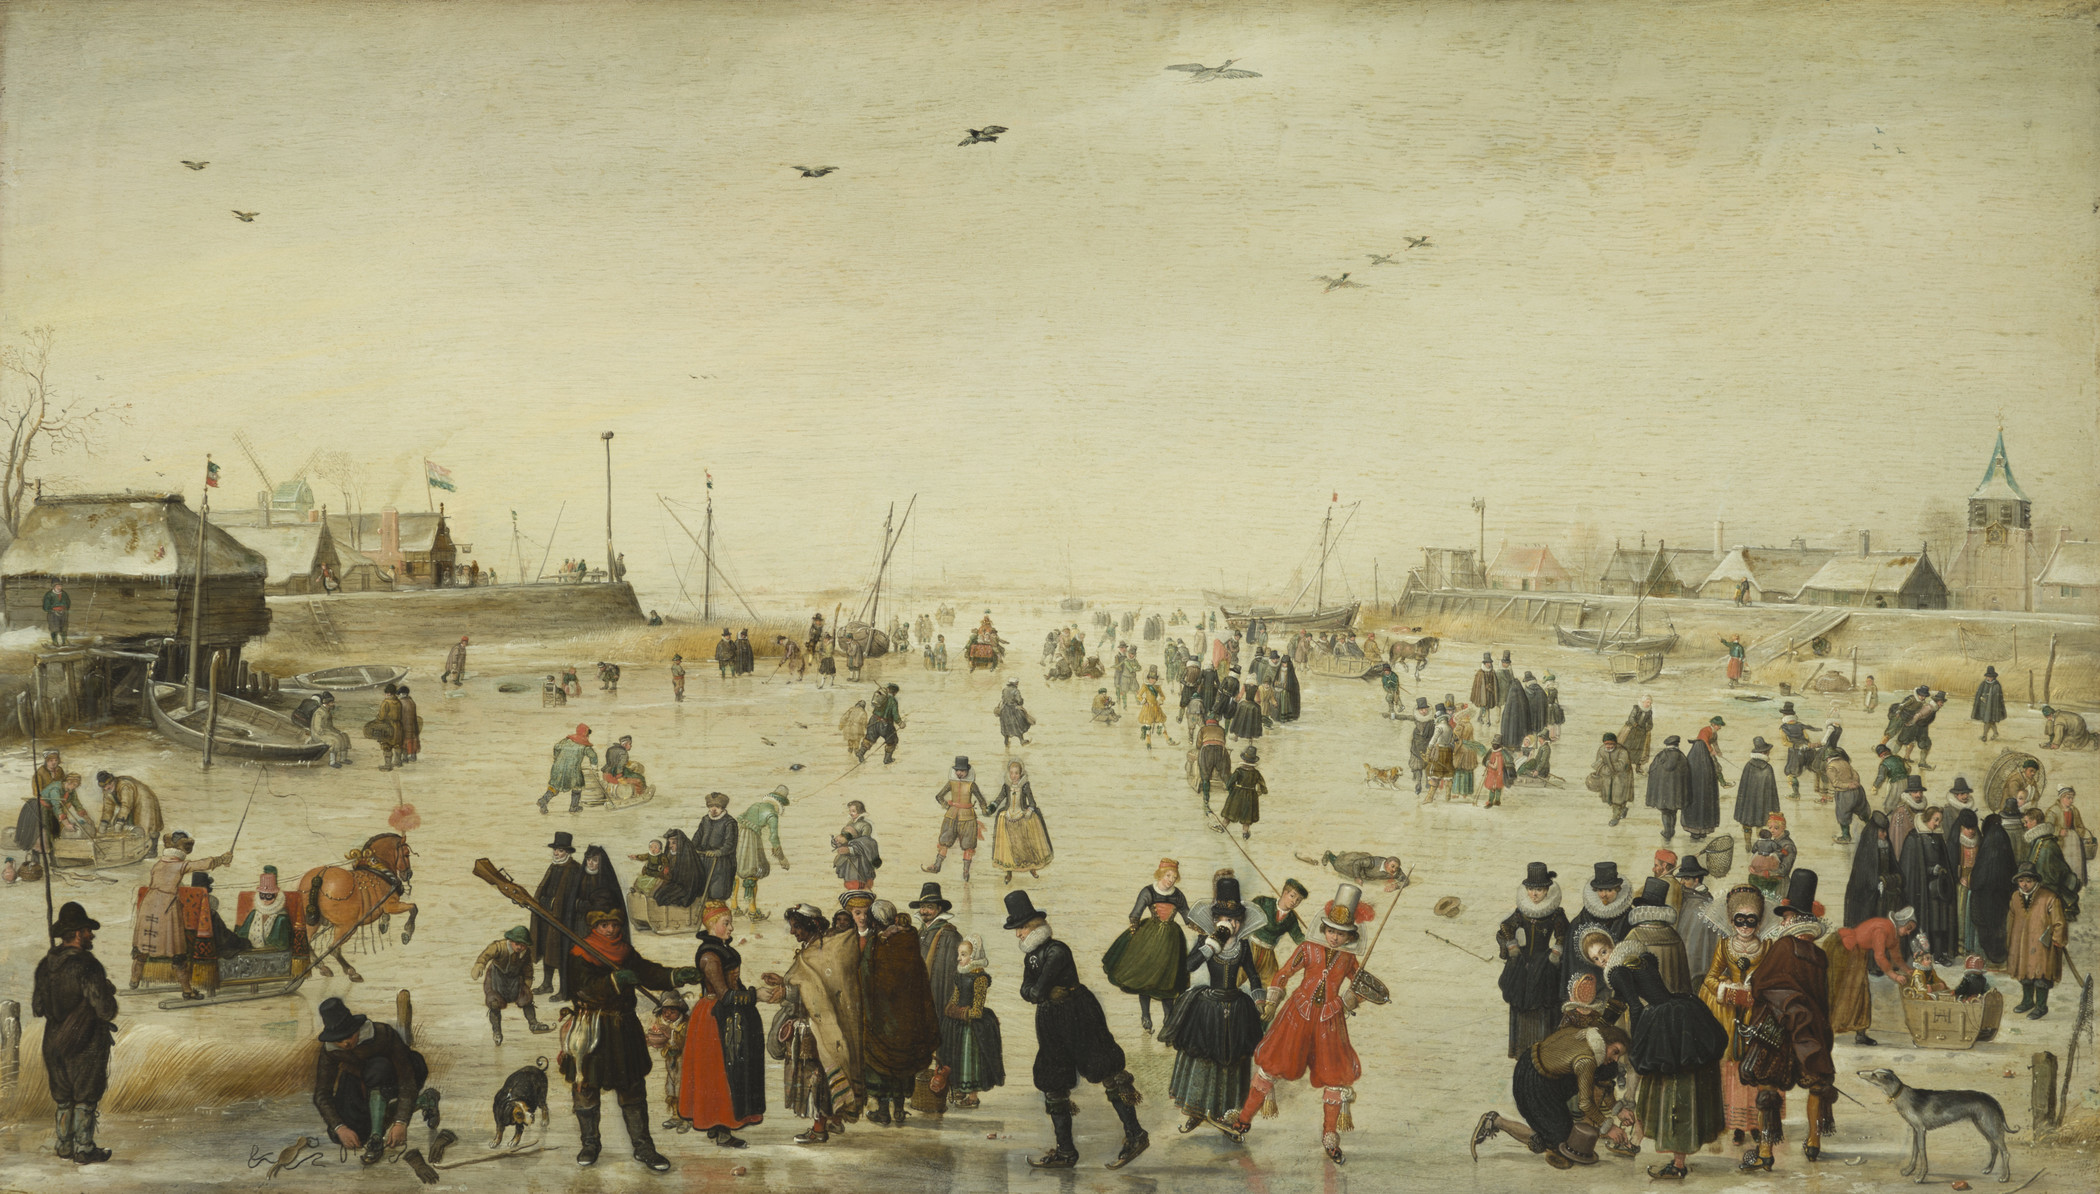 Hendrick Avercamp, Winter Scene on a Frozen Canal, c. 1620, Los Angeles County Museum of Art, partial gift of Mr. and Mrs. Edward William Carter and purchased with funds provided by The Ahmanson Foundation, the Paul Rodman Mabury Collection, the William Randolph Hearst Collection, the Michael J. Connell Foundation, the Marion Davies Collection, Mr. and Mrs. Lauritz Melchior, Mr. and Mrs. R. Stanton Avery, the Estate of Anita M. Baldwin by exchange, and Hannah L. Carter, photo © Museum Associates/LACMA